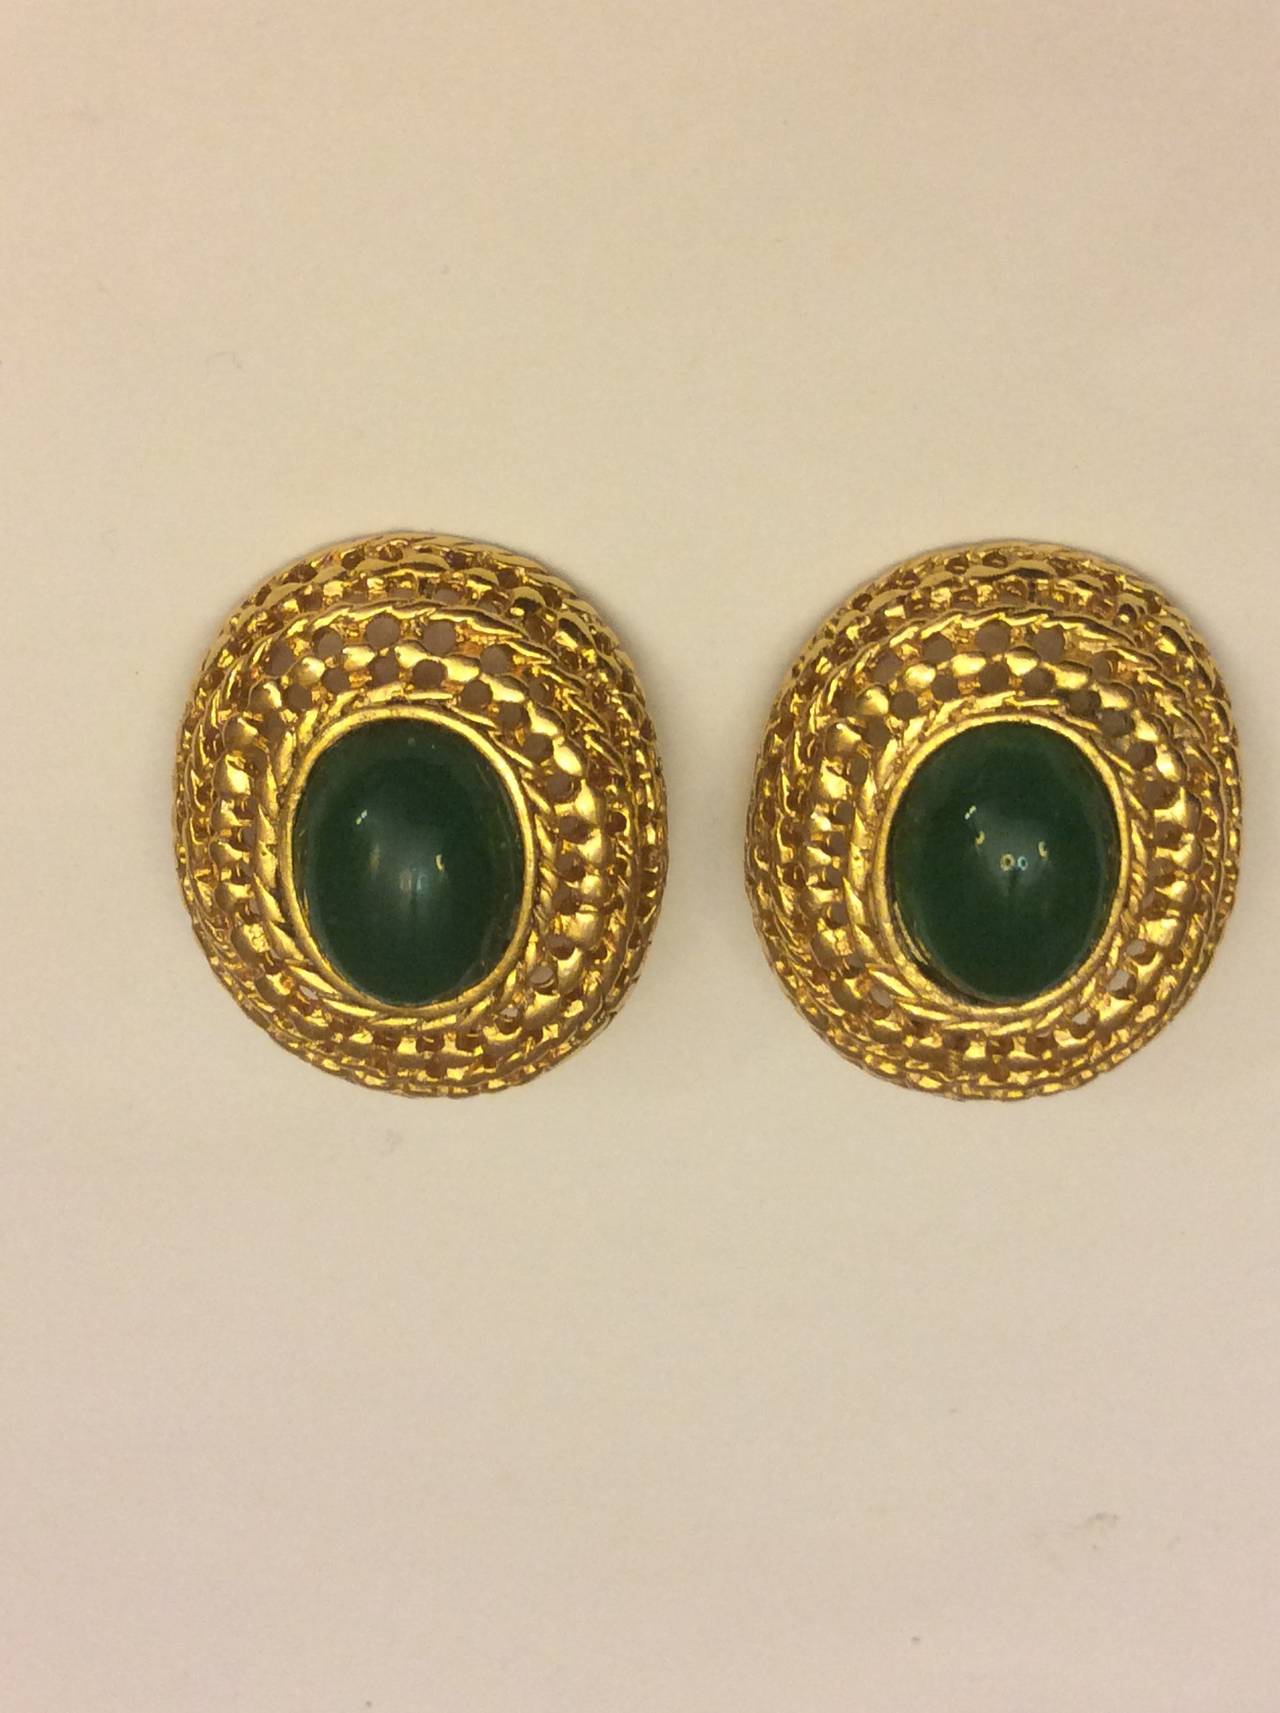 Vintage Les Bernard Emerald Green Cabochon Gold Clip On Earrings In Excellent Condition For Sale In Lake Park, FL